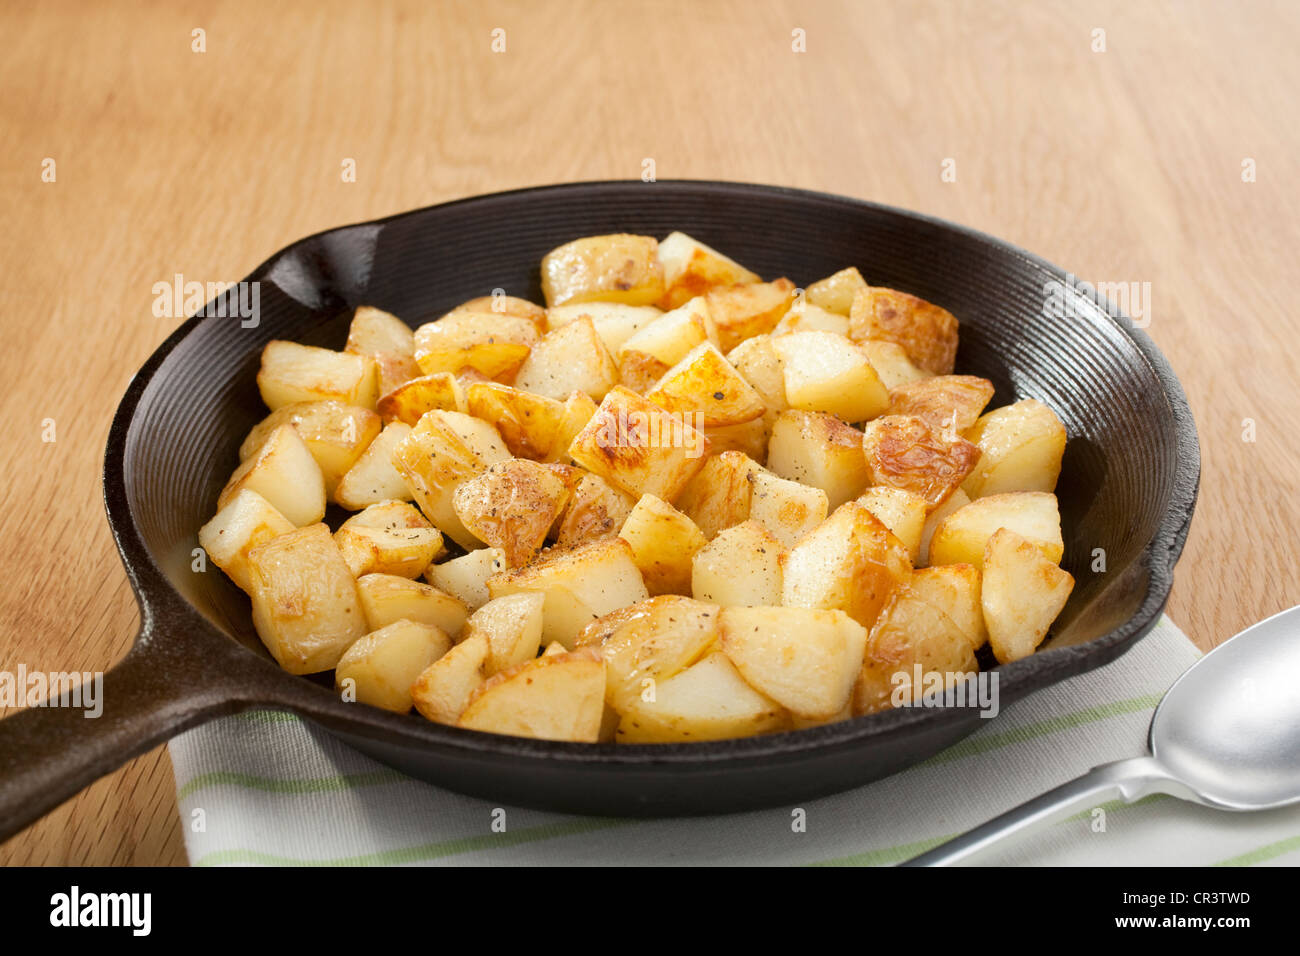 A small cast iron skillet or frying pan filled with home fries or saute potatoes. Stock Photo